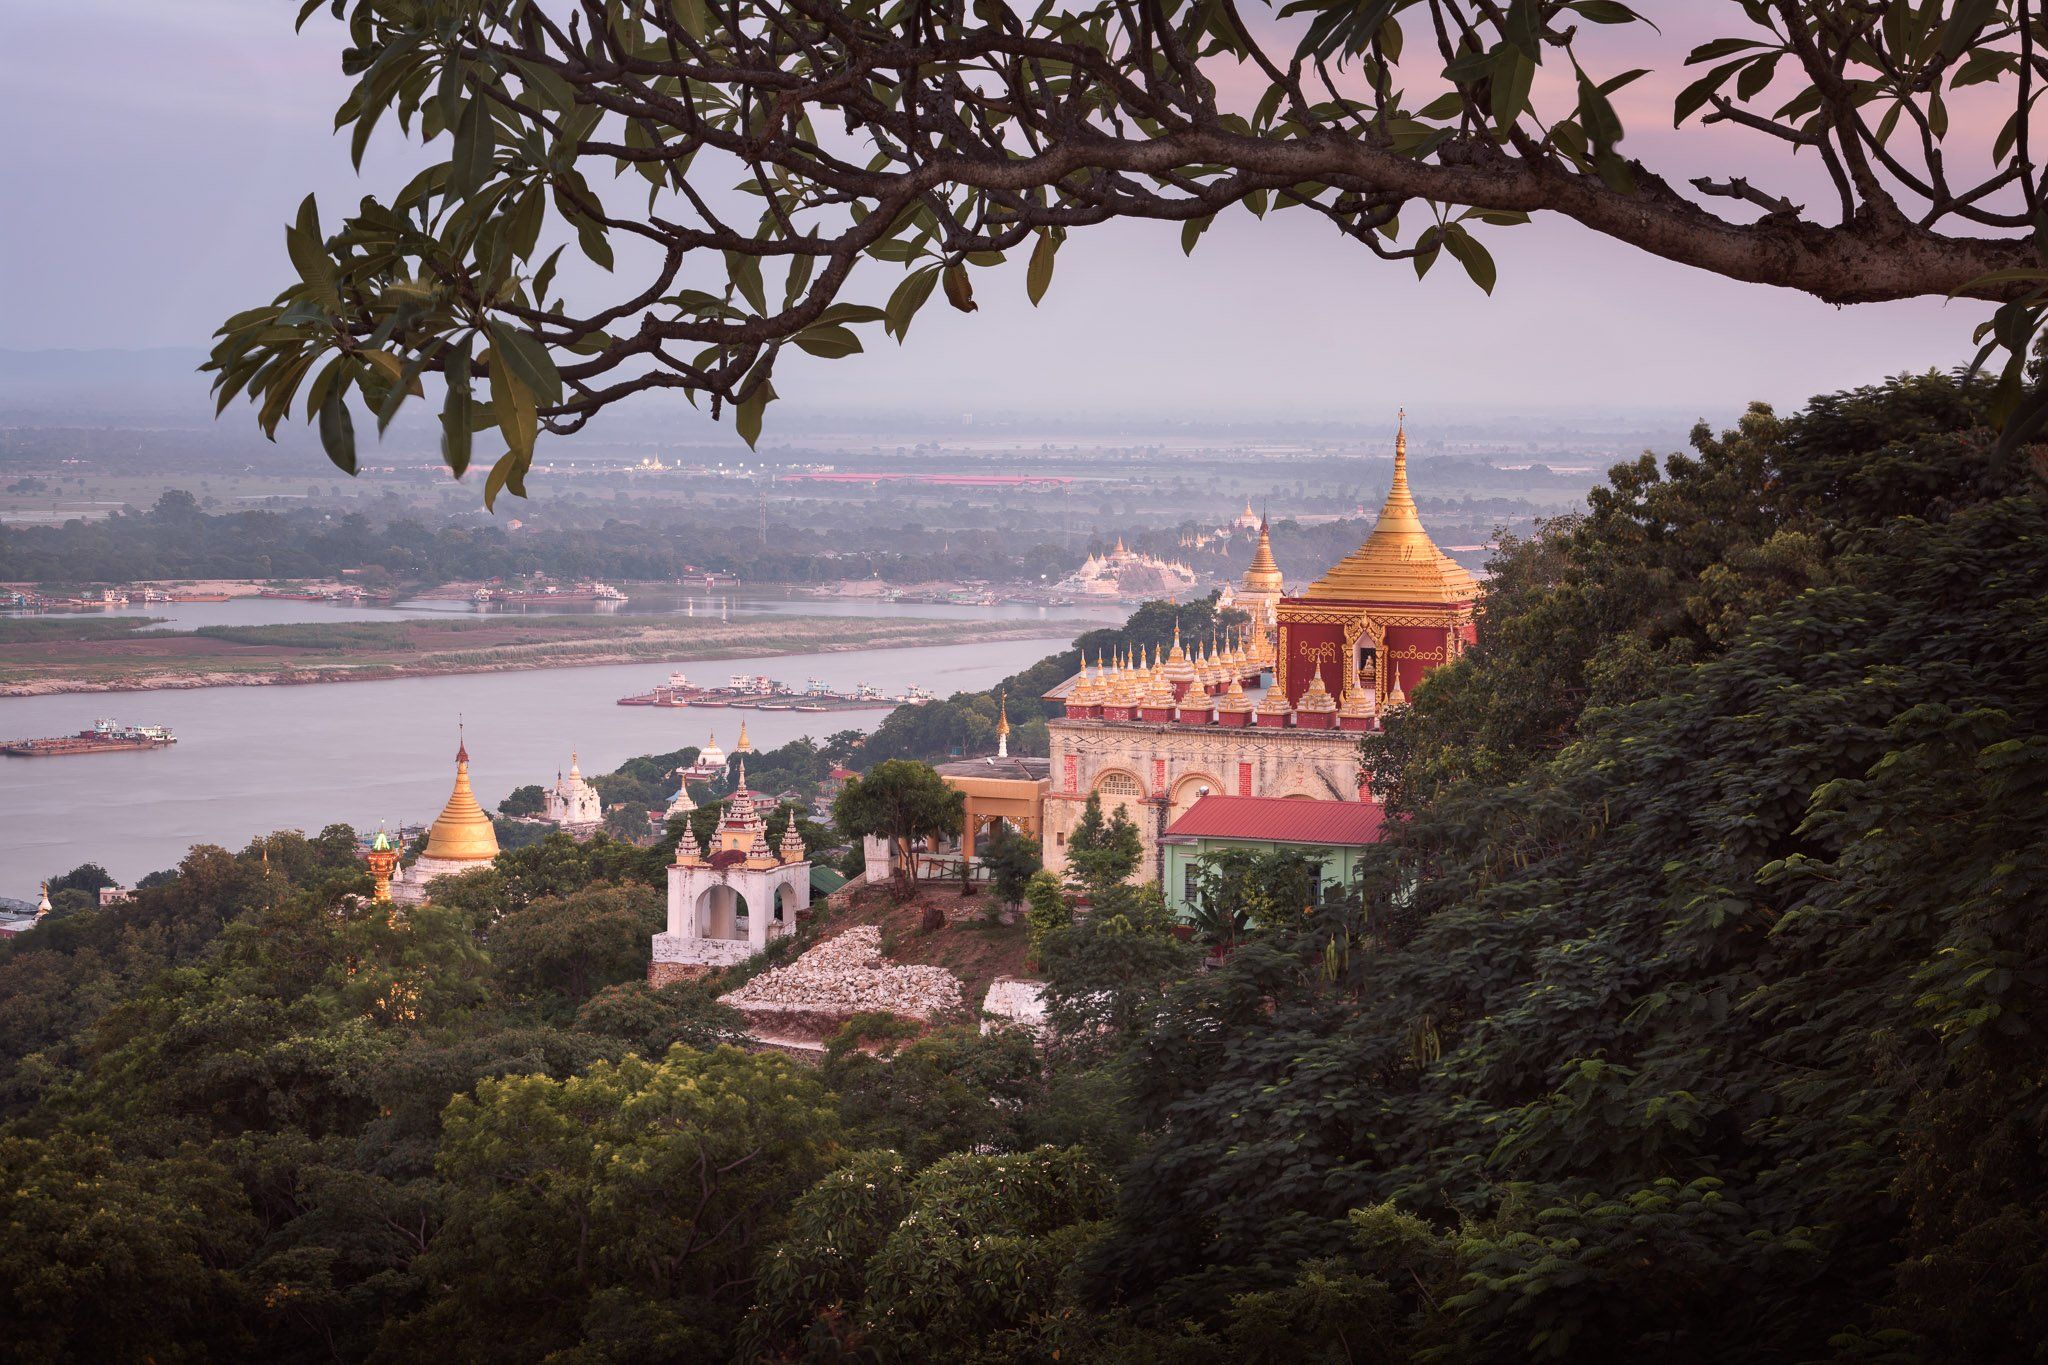 architecture, asia, asian, attraction, blue, buddha, buddhism, buddhist, building, burma, burmese, city, complex, culture, evening, exterior, golden, heritage, hill, historic, history, la, landmark, mandalay, monument, myanmar, outdoor, pagoda, pyae, red,, Andrey Omelyanchuk